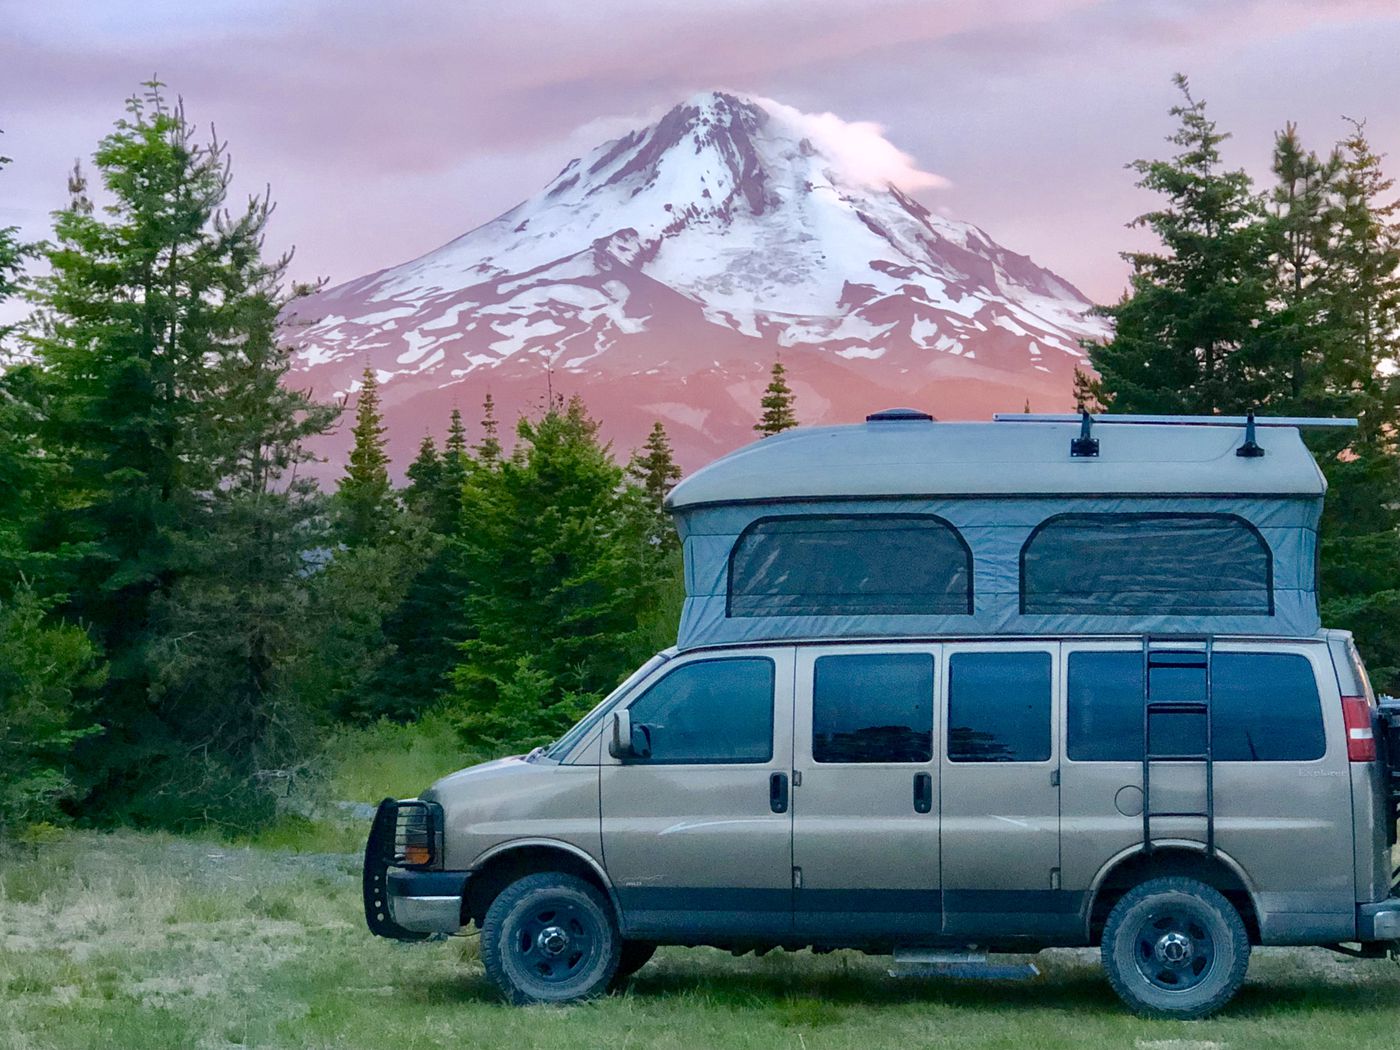 Mor tweet navigation Used campers for sale: a new website helps you buy a conversion van - Curbed